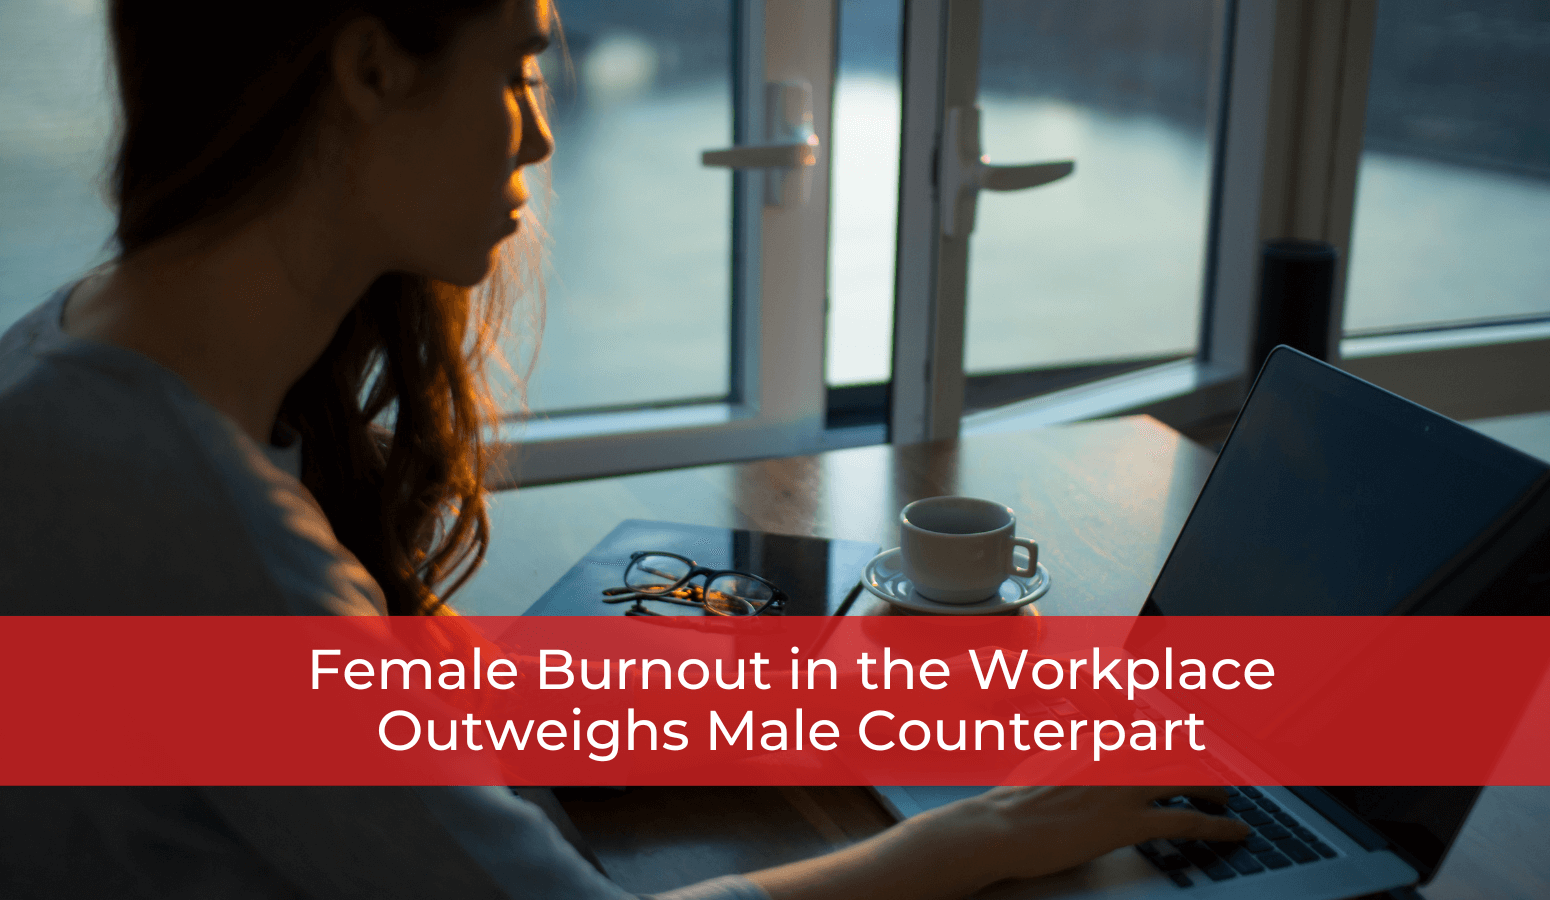 Featured image for “Female Burnout in the Workplace Outweighs Male Counterpart”